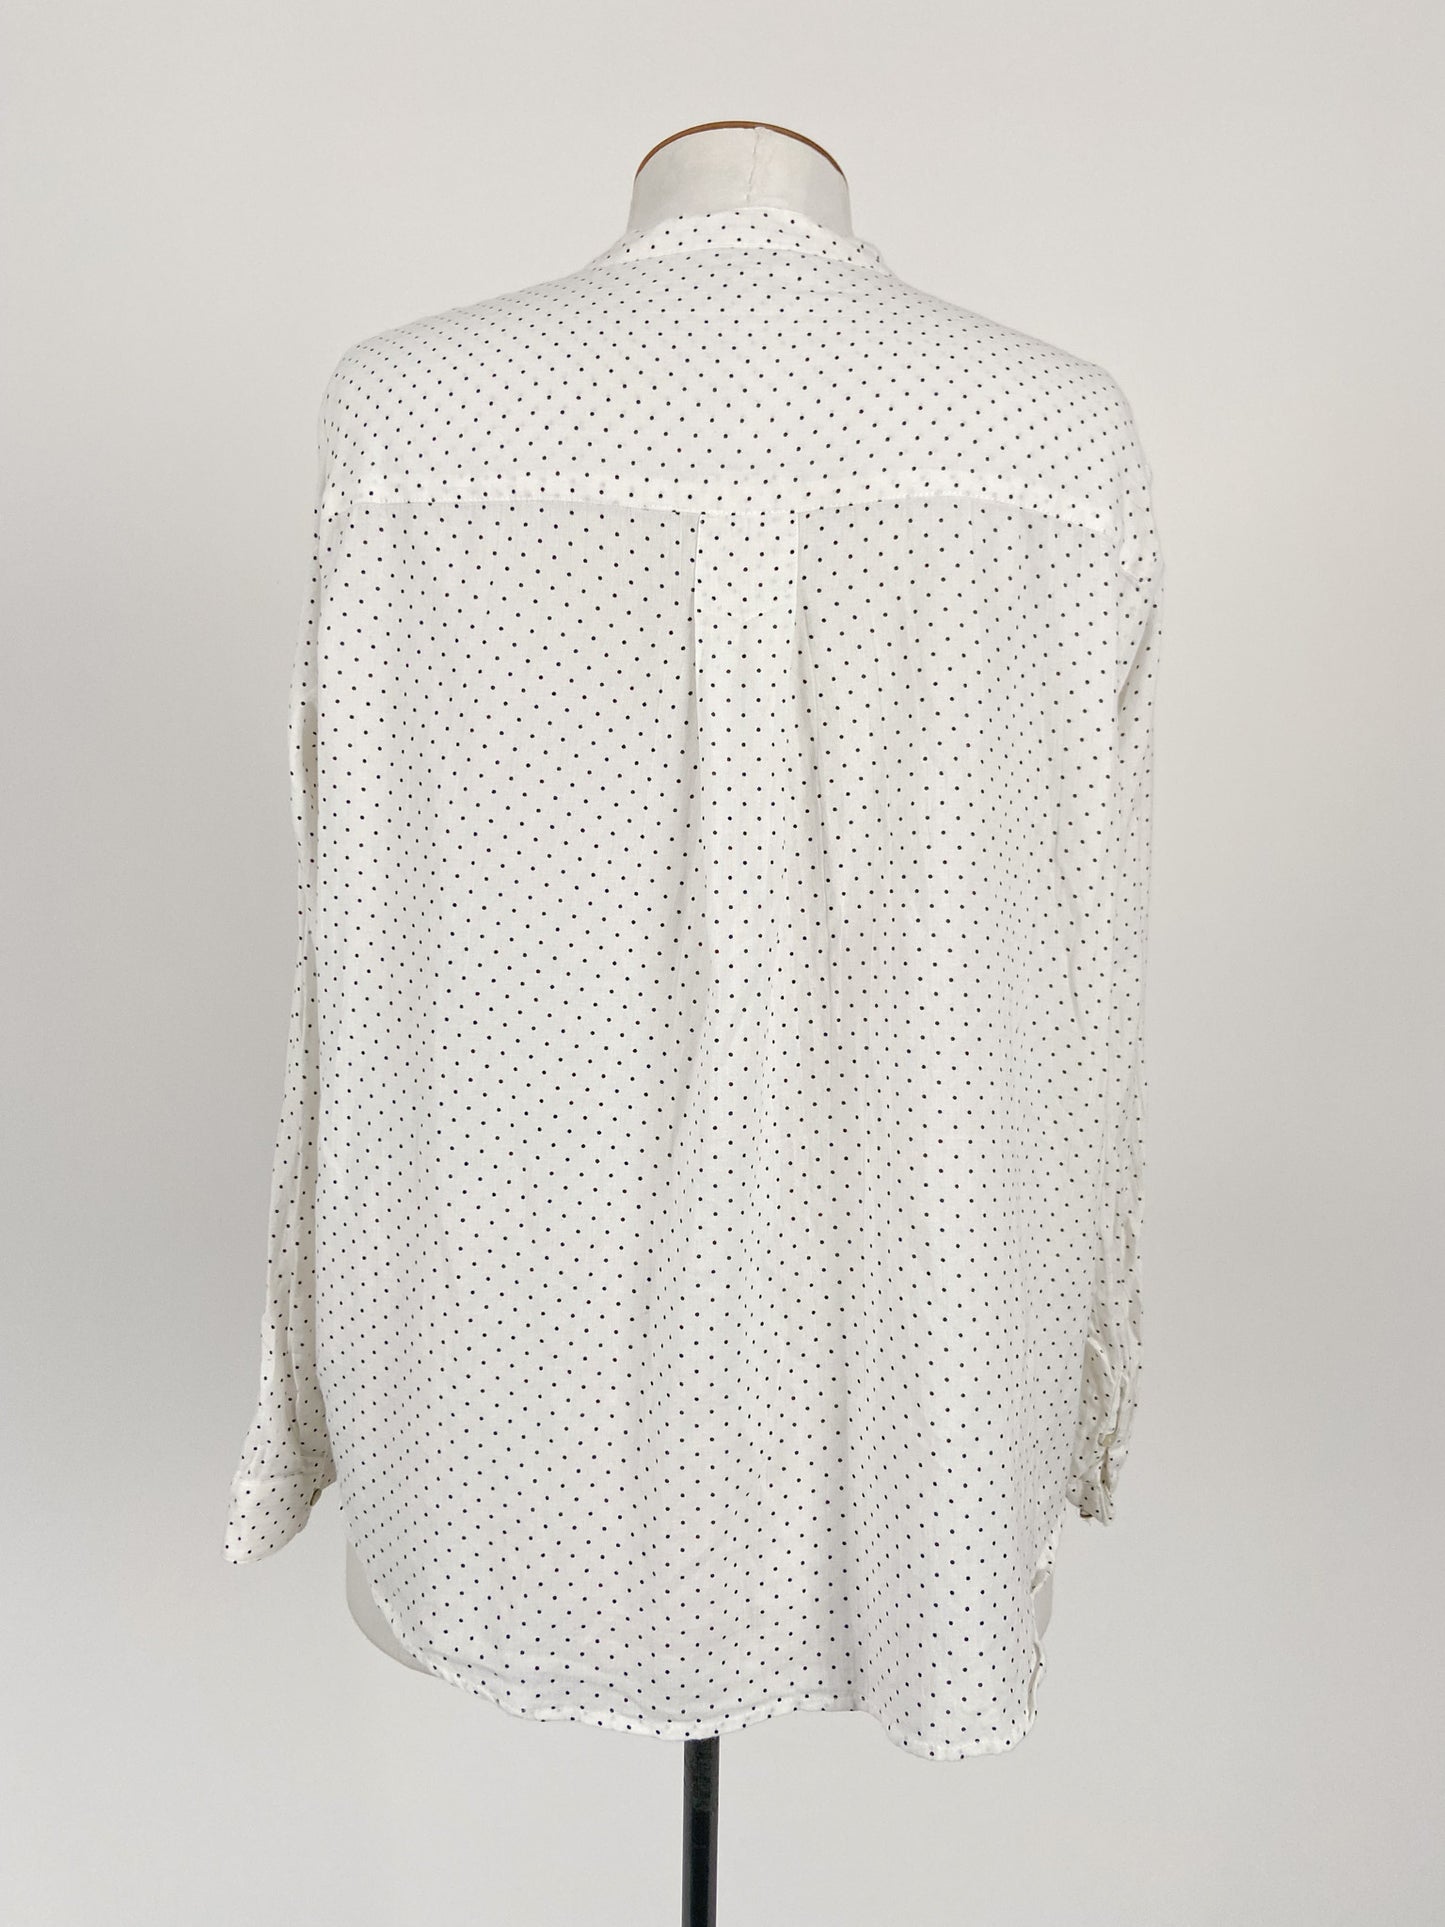 E Sprit | White Casual/Workwear Top | Size 16